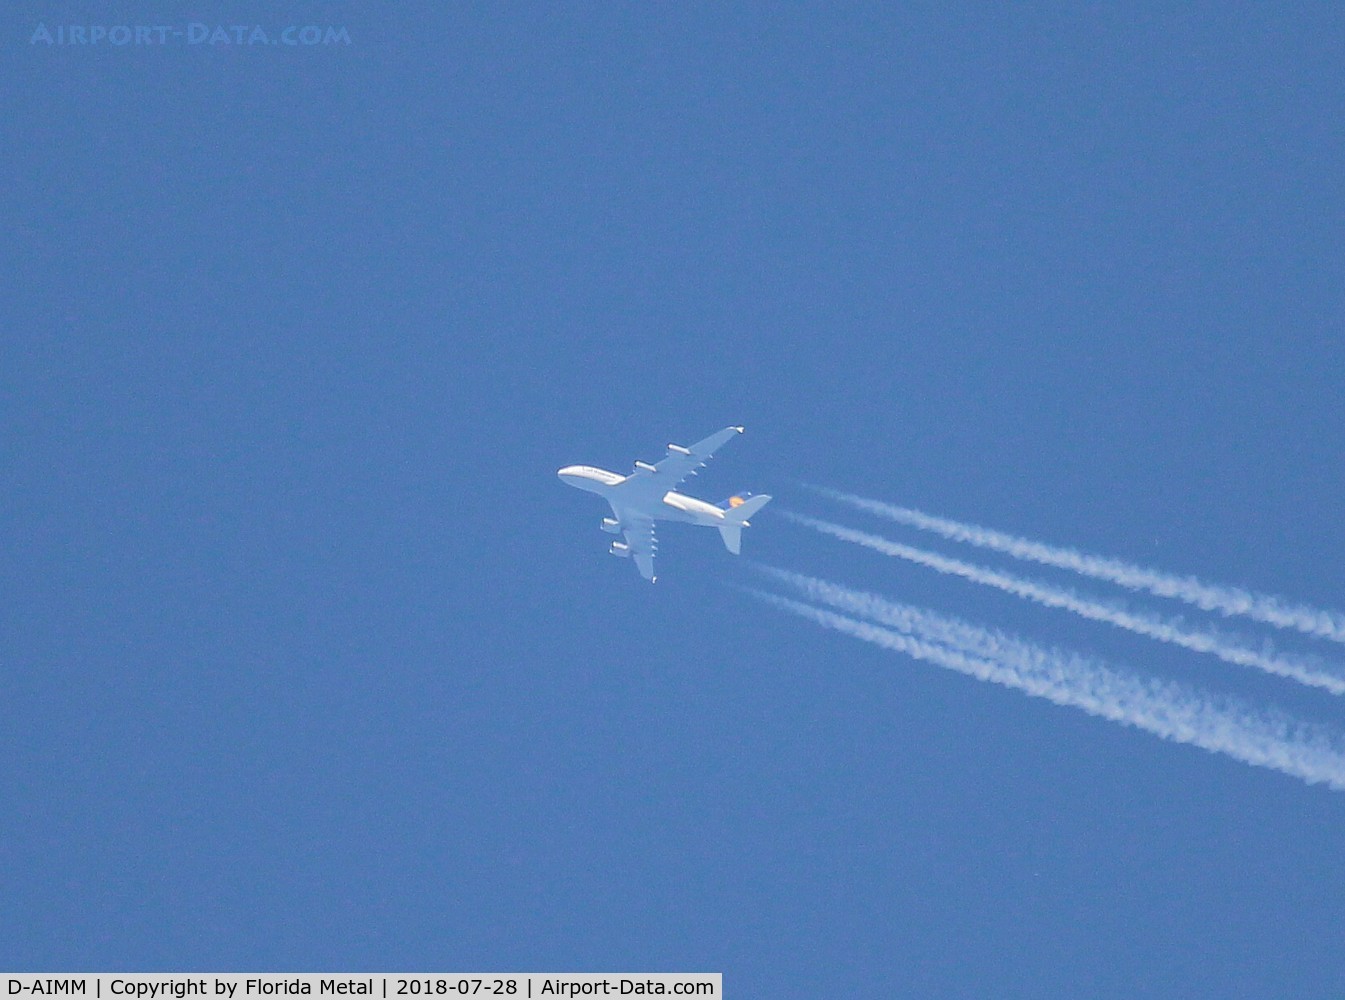 D-AIMM, 2014 Airbus A380-841 C/N 175, Lufthansa seen over Oshkosh flying from FRA to IAH